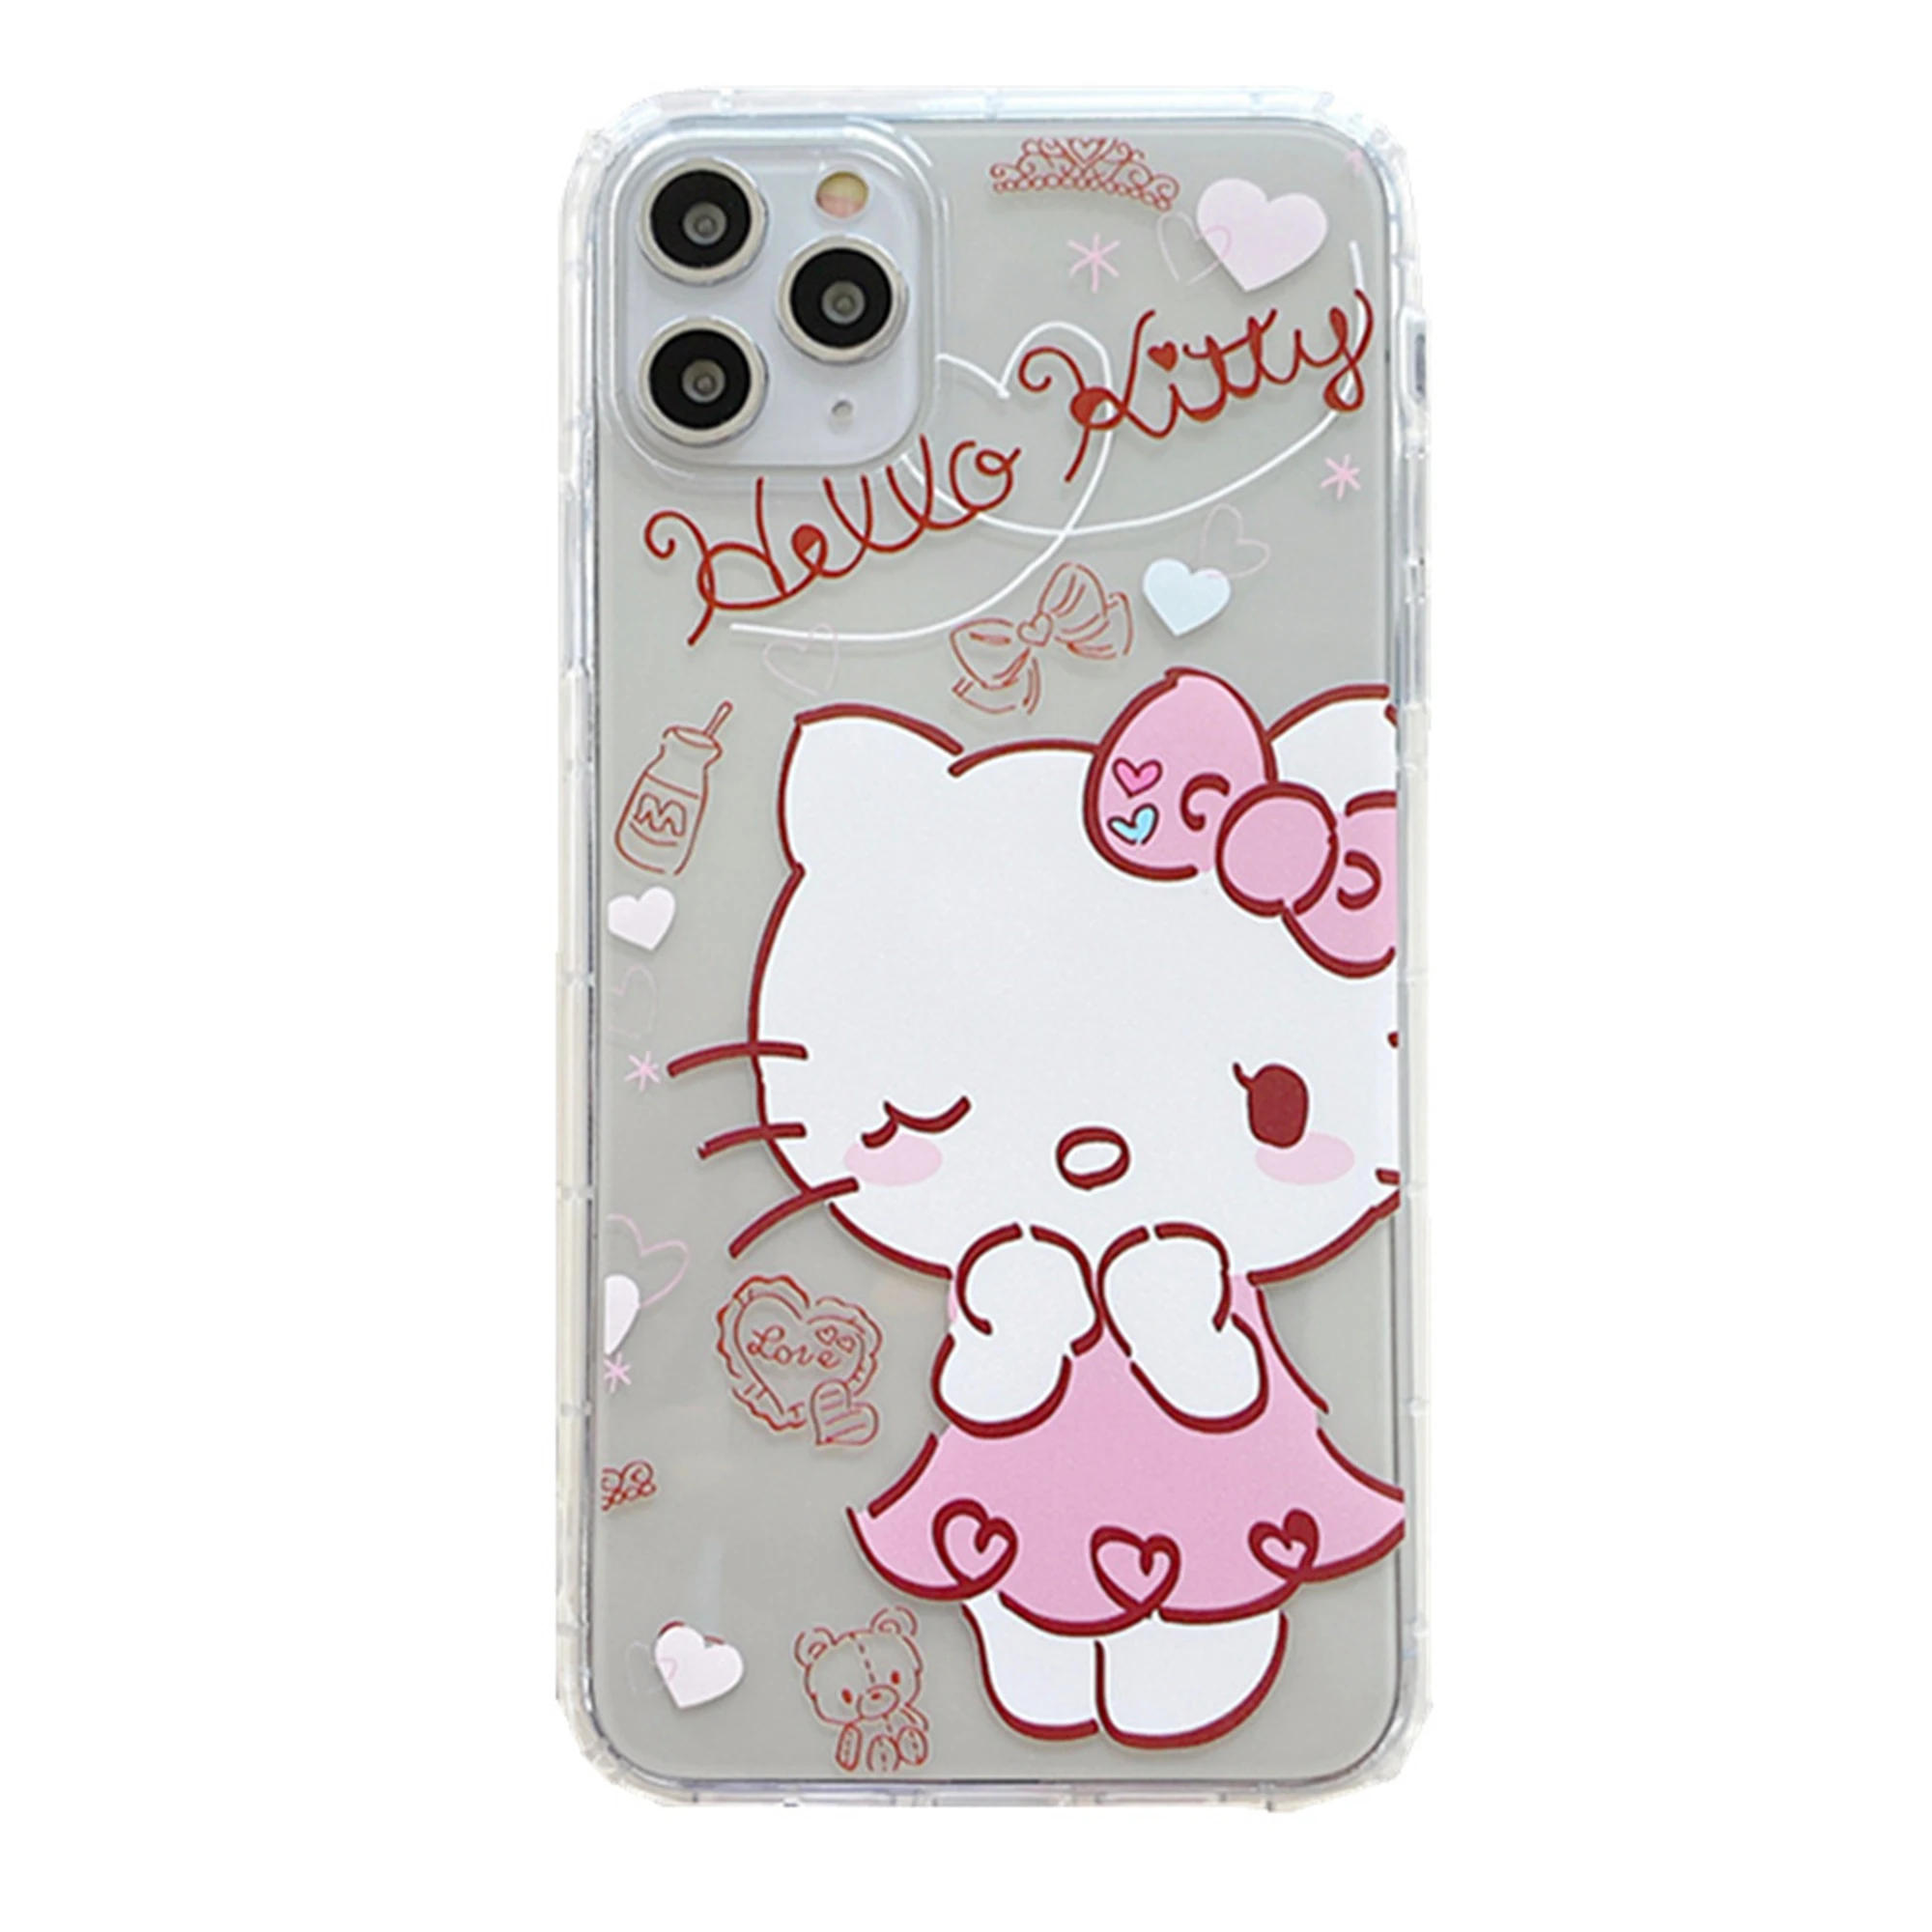 Cute Kitty Cat Cartoon Phone Case For Iphone 11pro Max Case Buy Soft Pink Color Hello Kitty Animals Girl Silicone Transparent Phone Case For Iphone 11 Pro Max Kt Cat Cute Hello